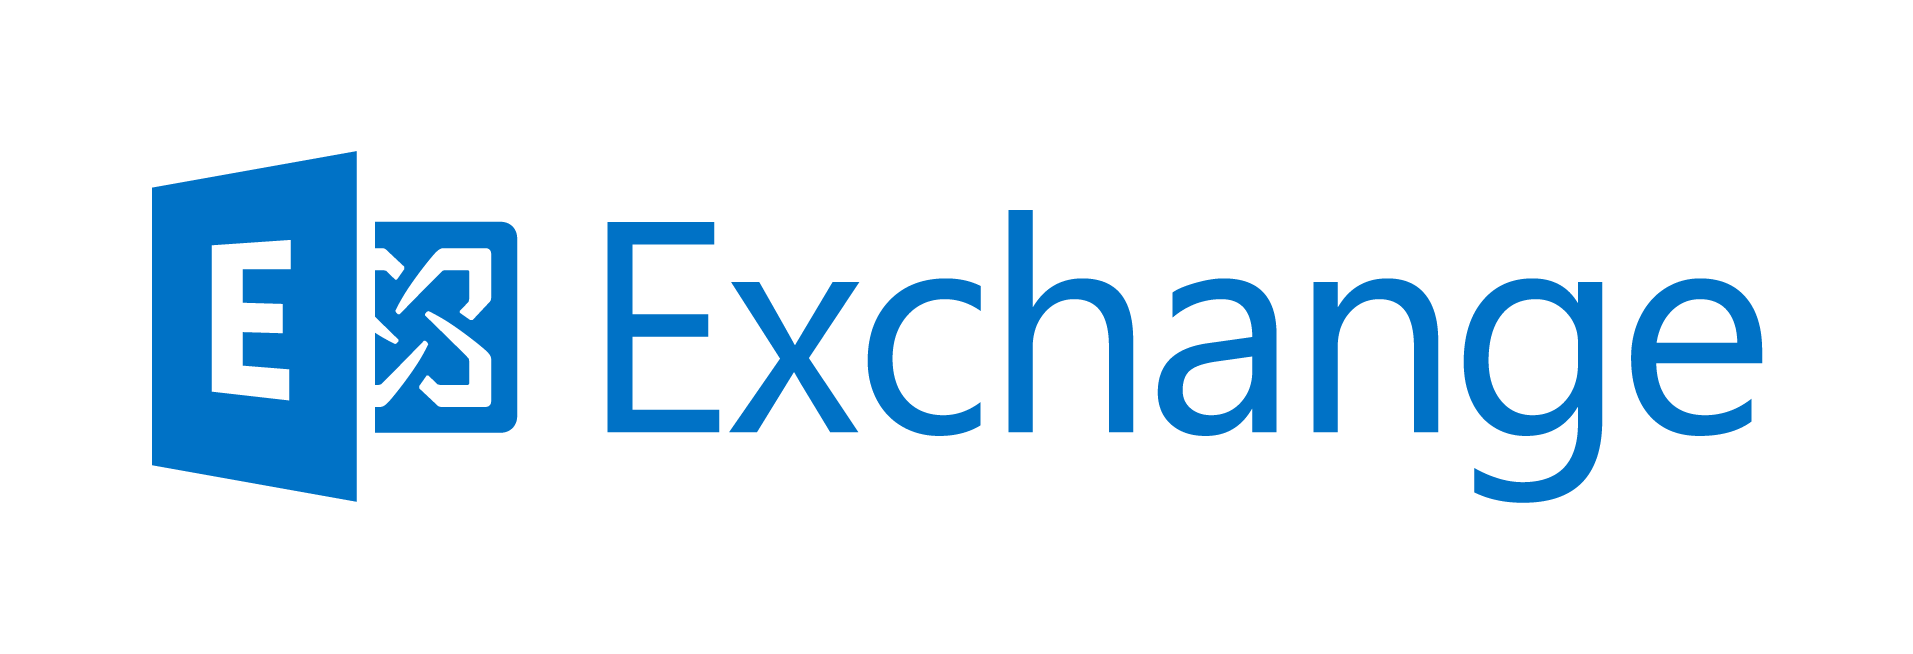 What Is Microsoft Exchange? - Microsoft Exchange, Transparent background PNG HD thumbnail